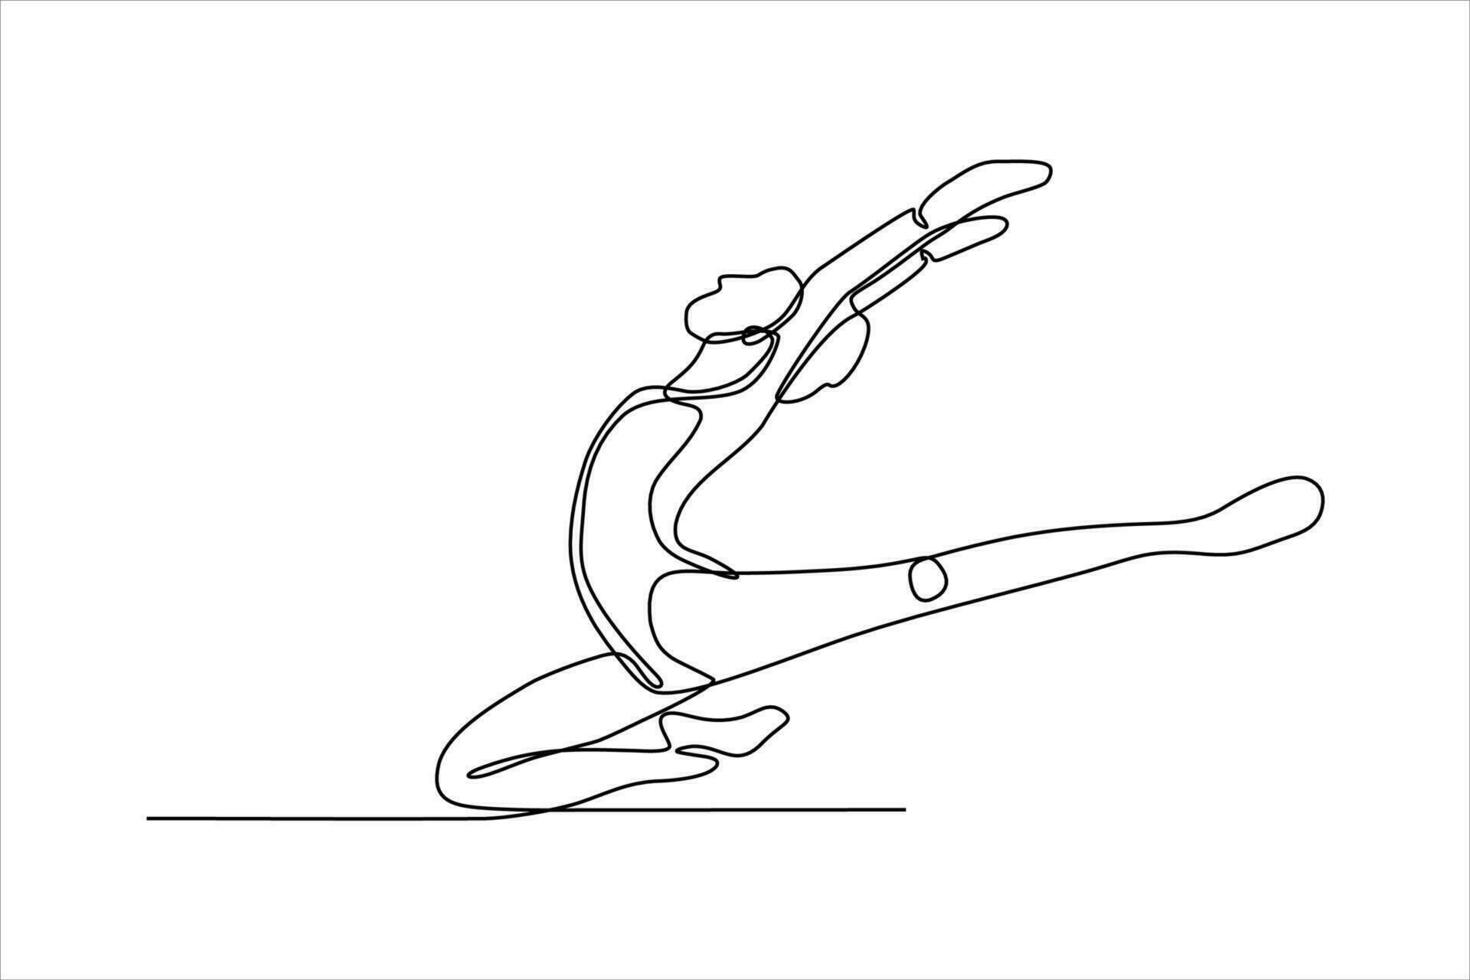 continuous line drawing of woman dancing ballet illustration vector